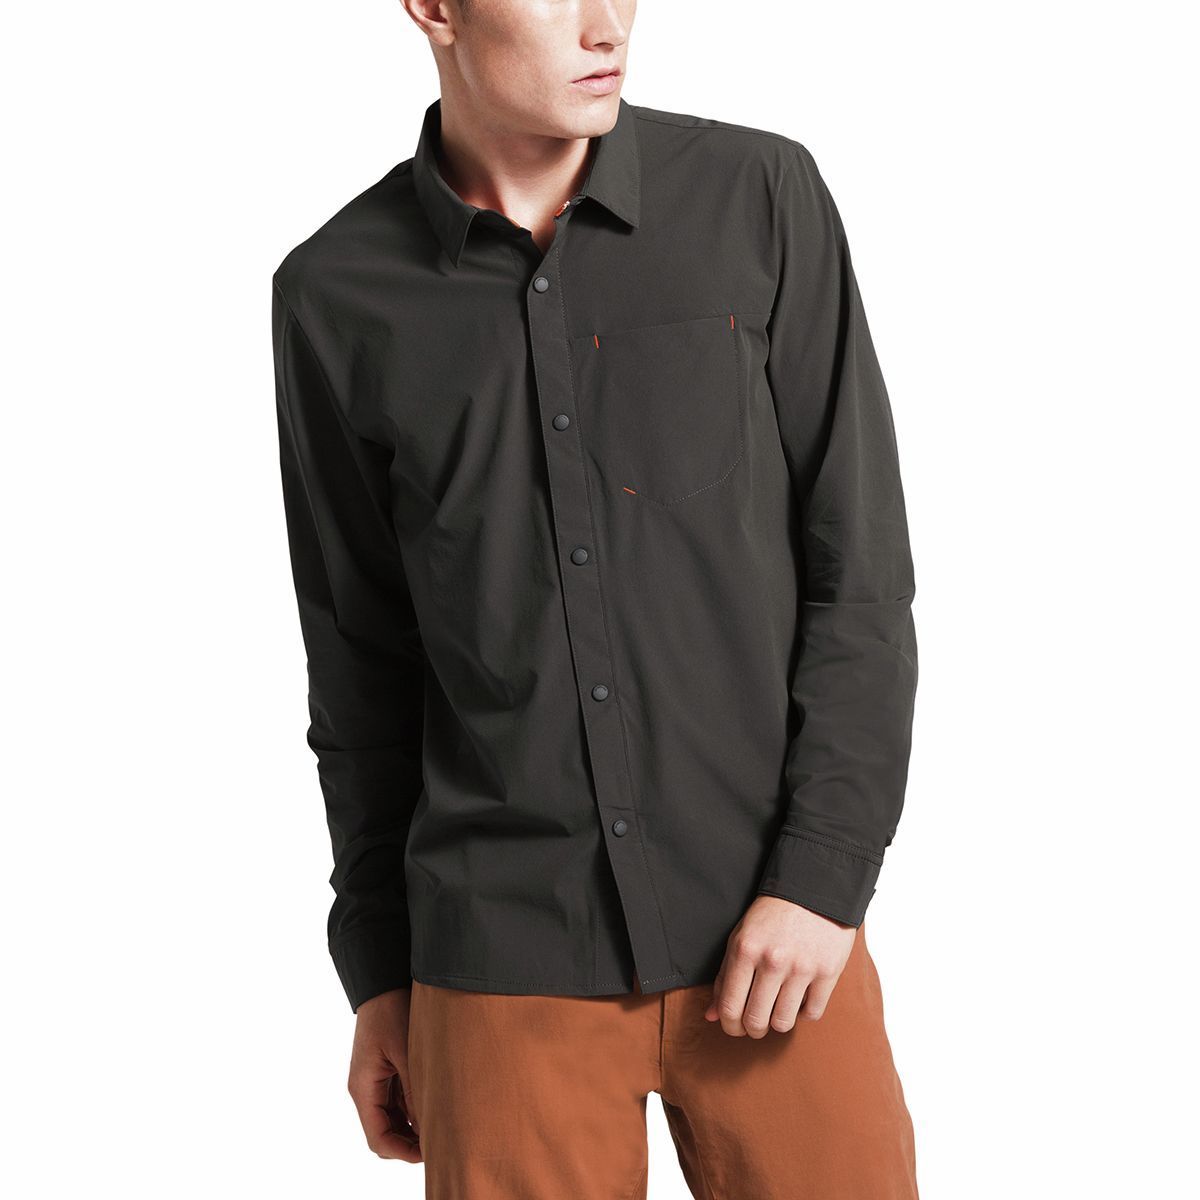 the north face men's long sleeve shirts